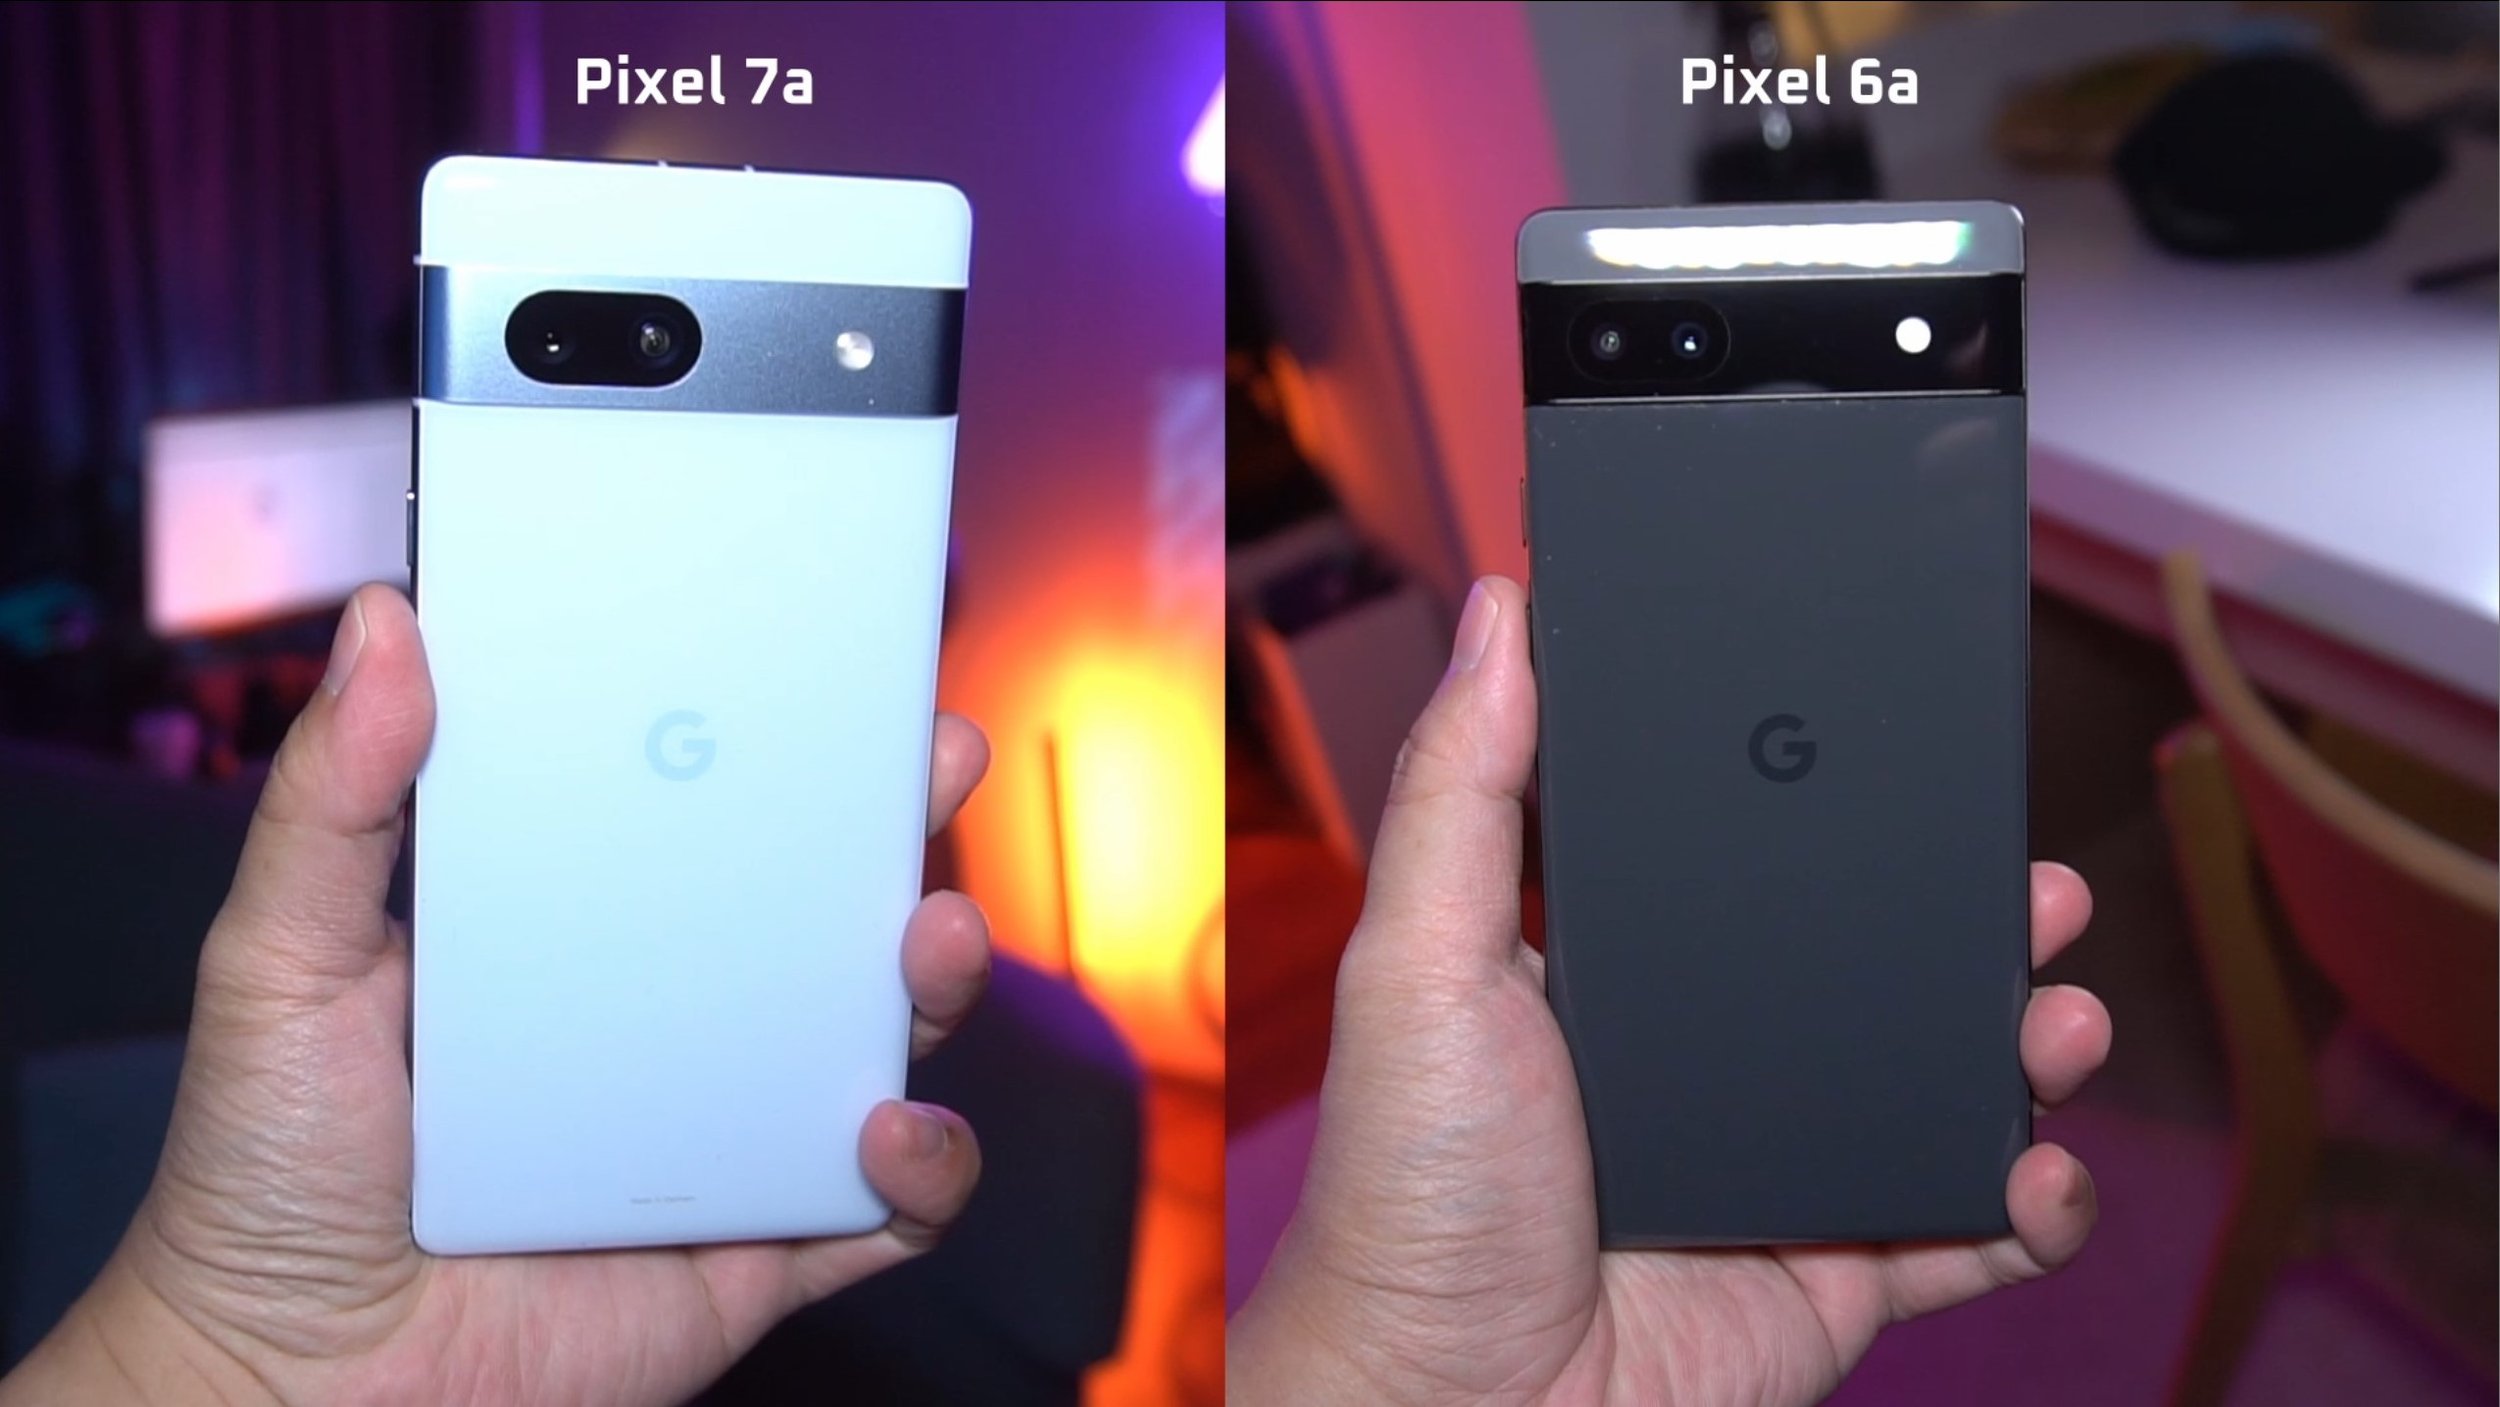 Google Pixel 7a: cameras, display, battery and everything you need